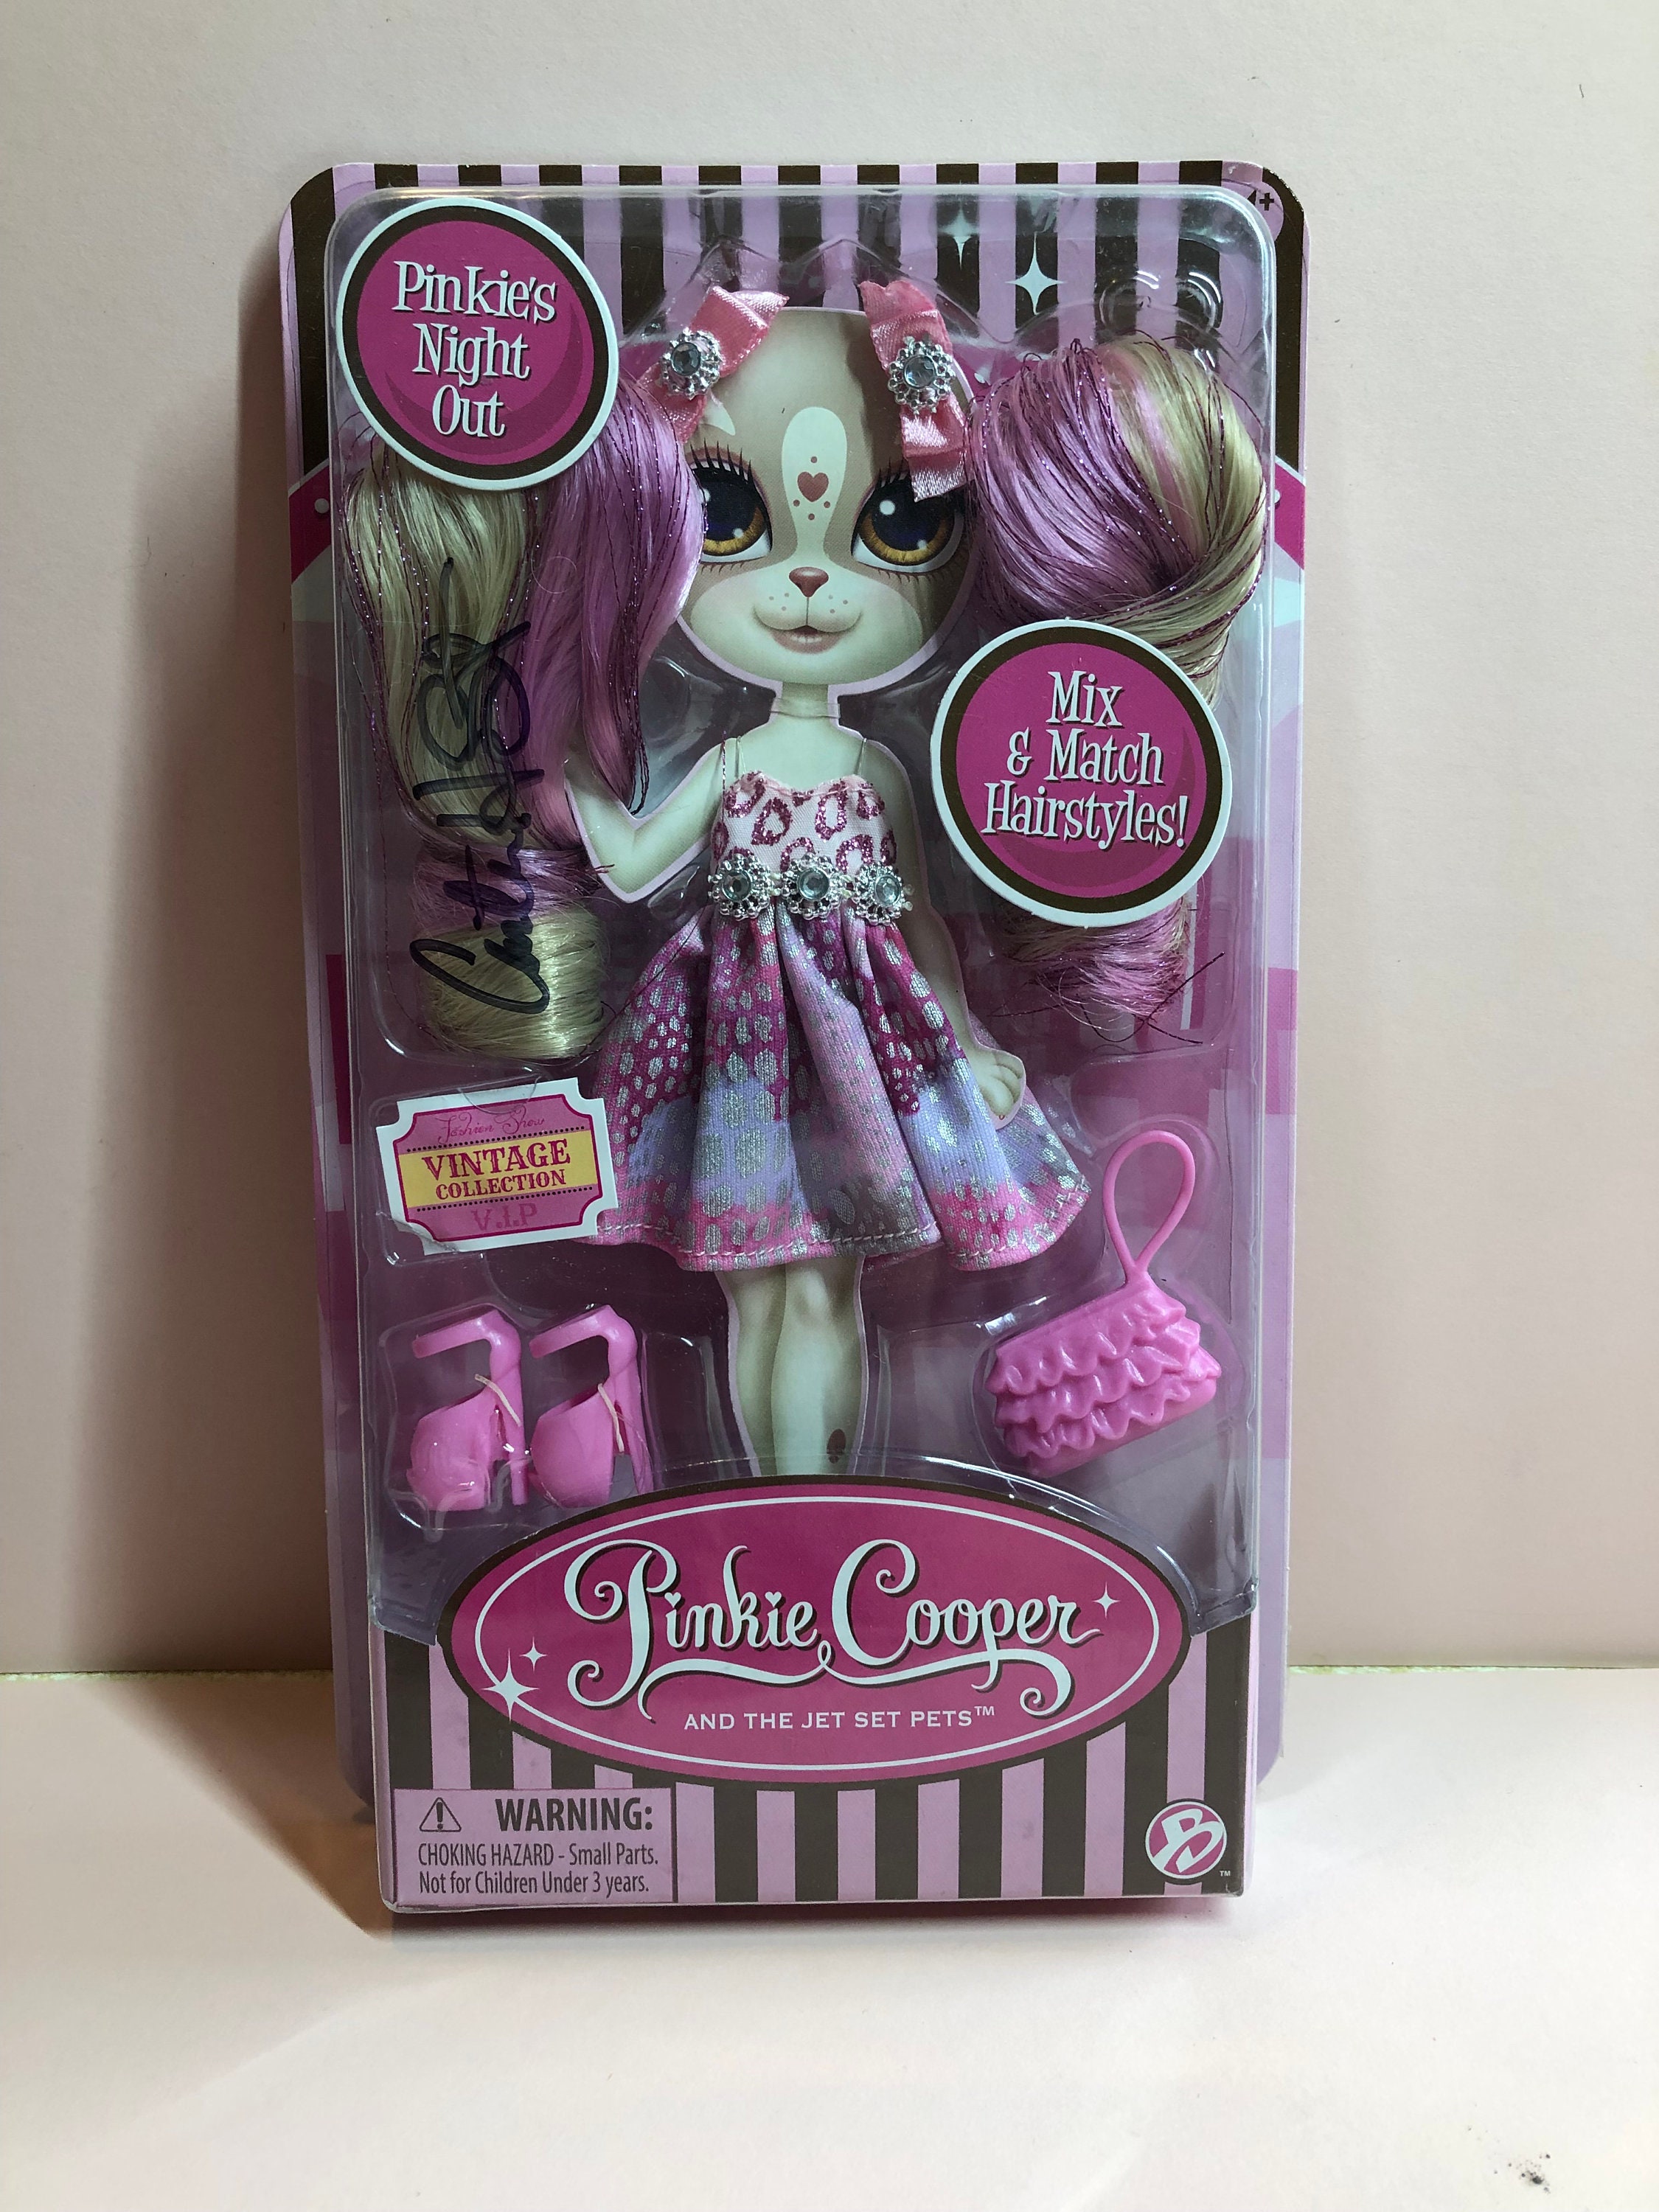 Sale Pinkie Cooper Fashion Pack Pinkie's Night Out. Very Rare Edition.  Autographed by Pinkie Cooper Creator Carter Bryant 